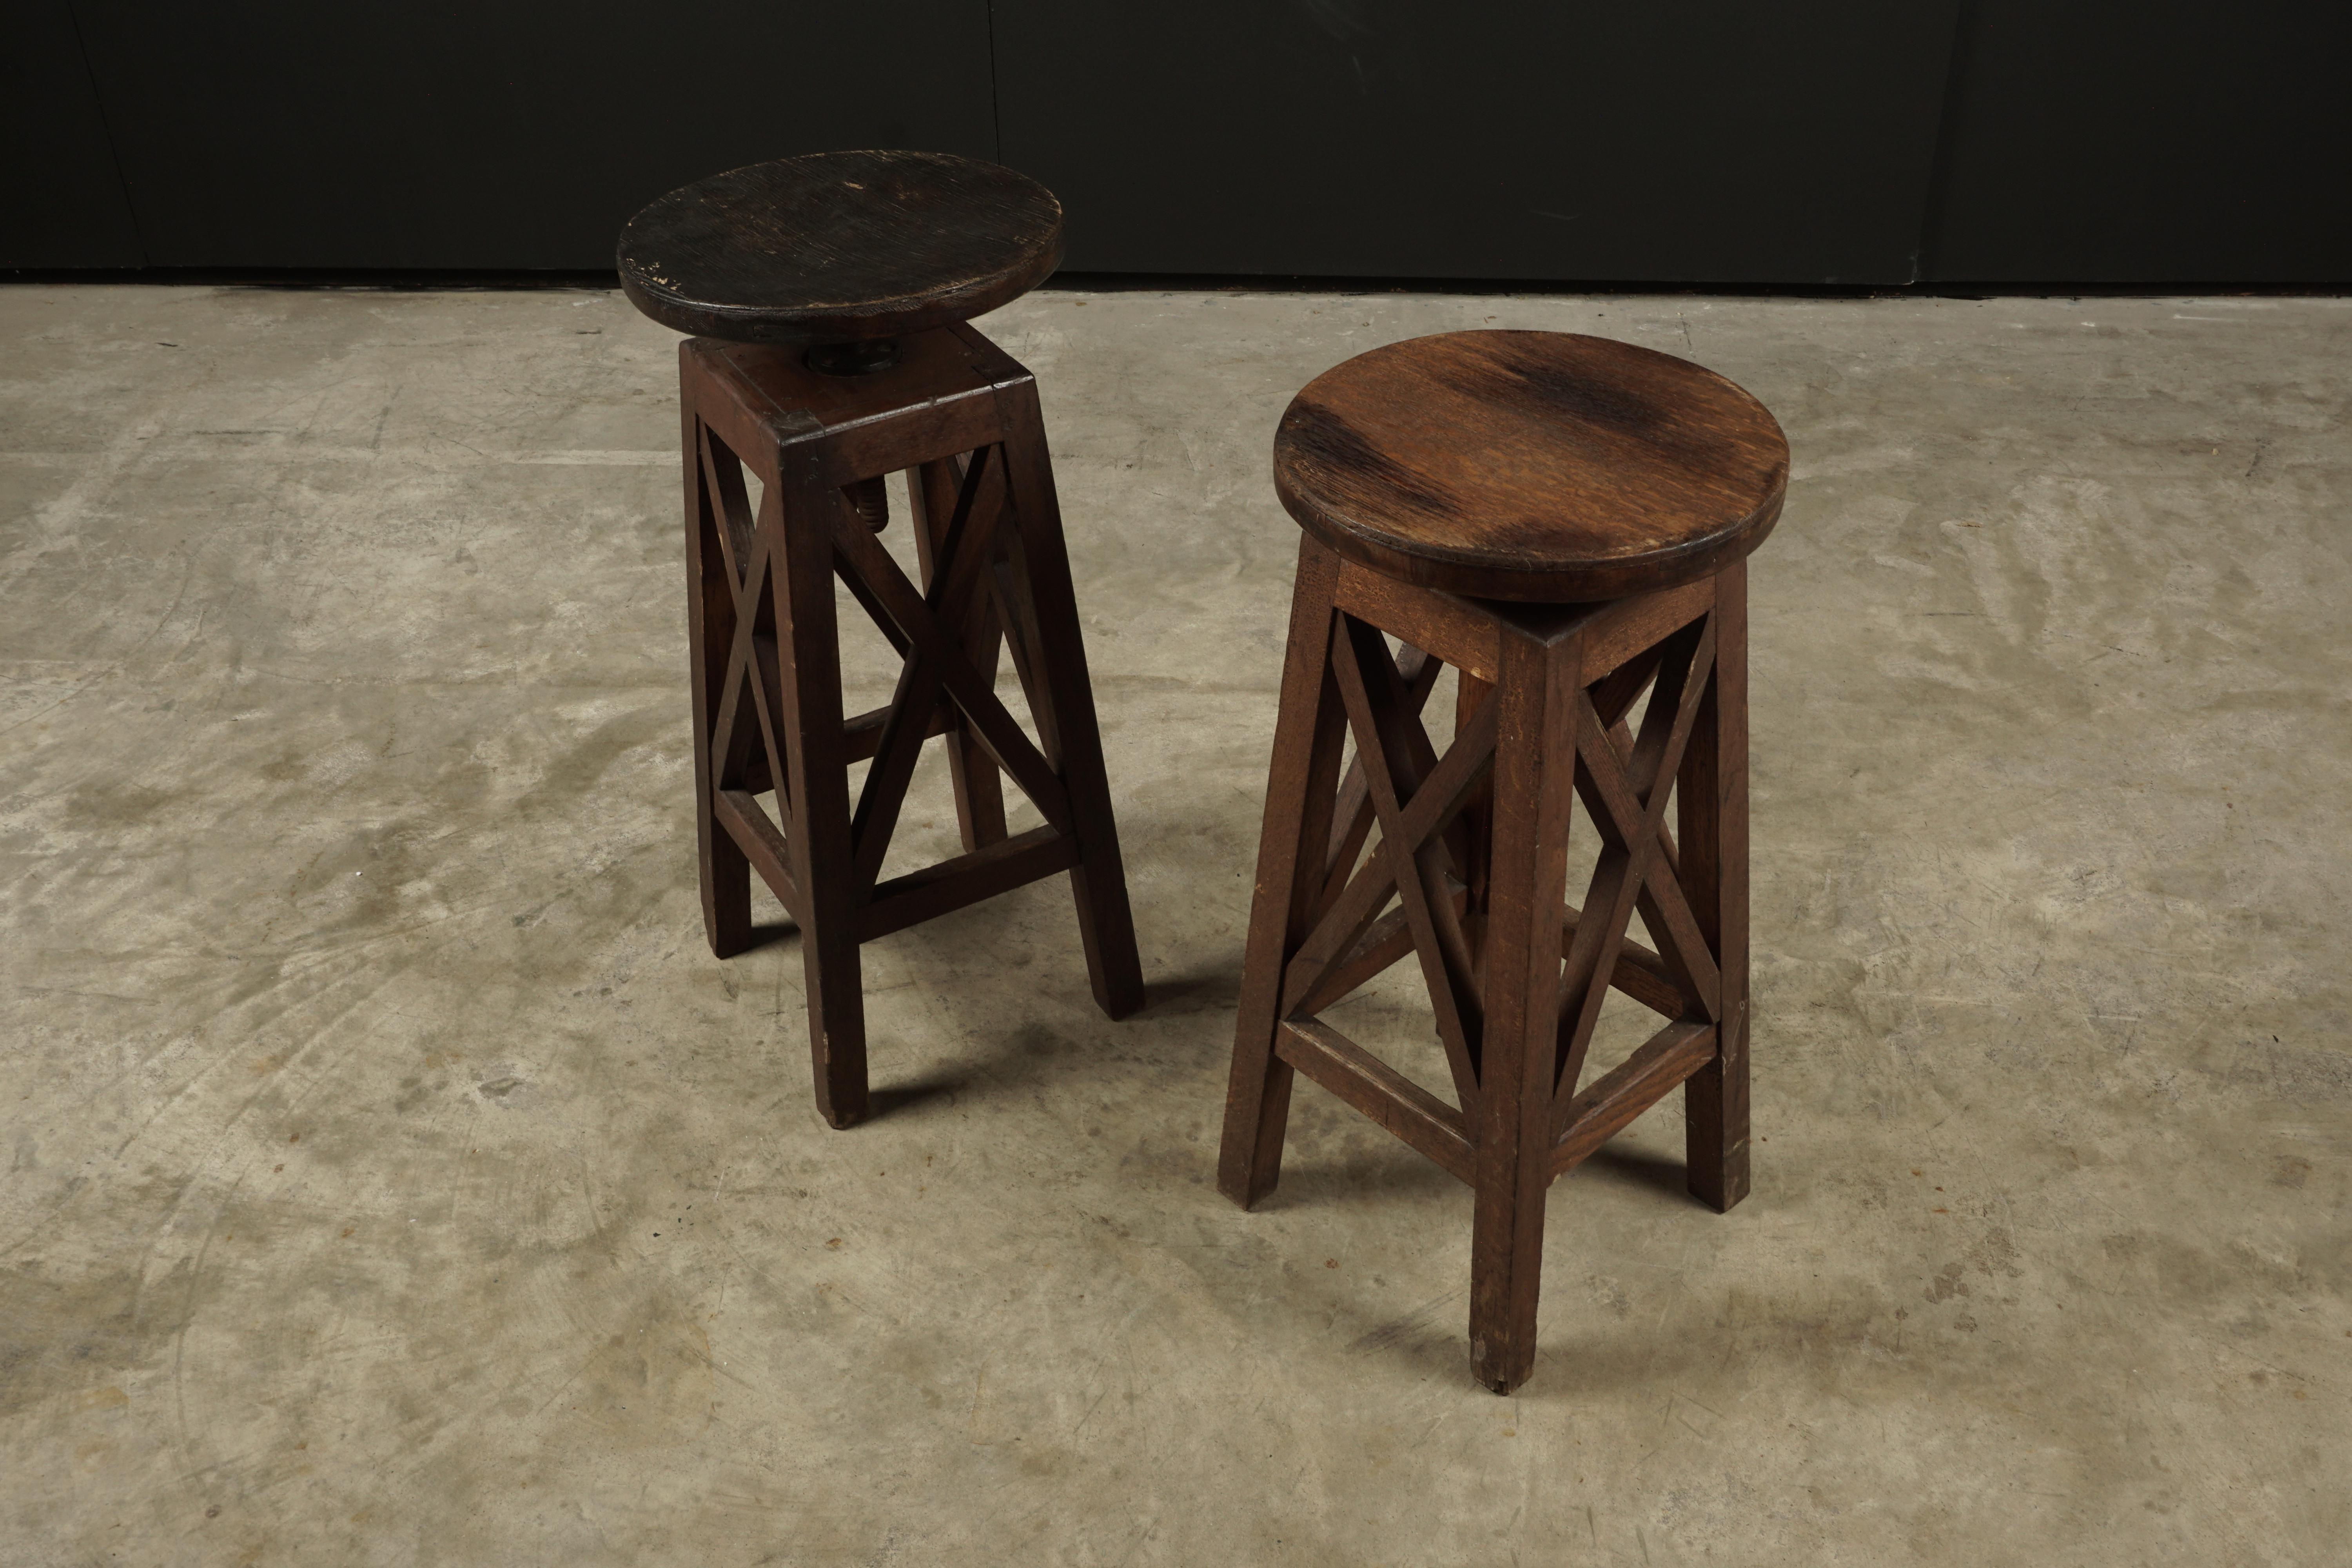 Mid-20th Century Vintage Pair of Oak Pedestals from France, circa 1950